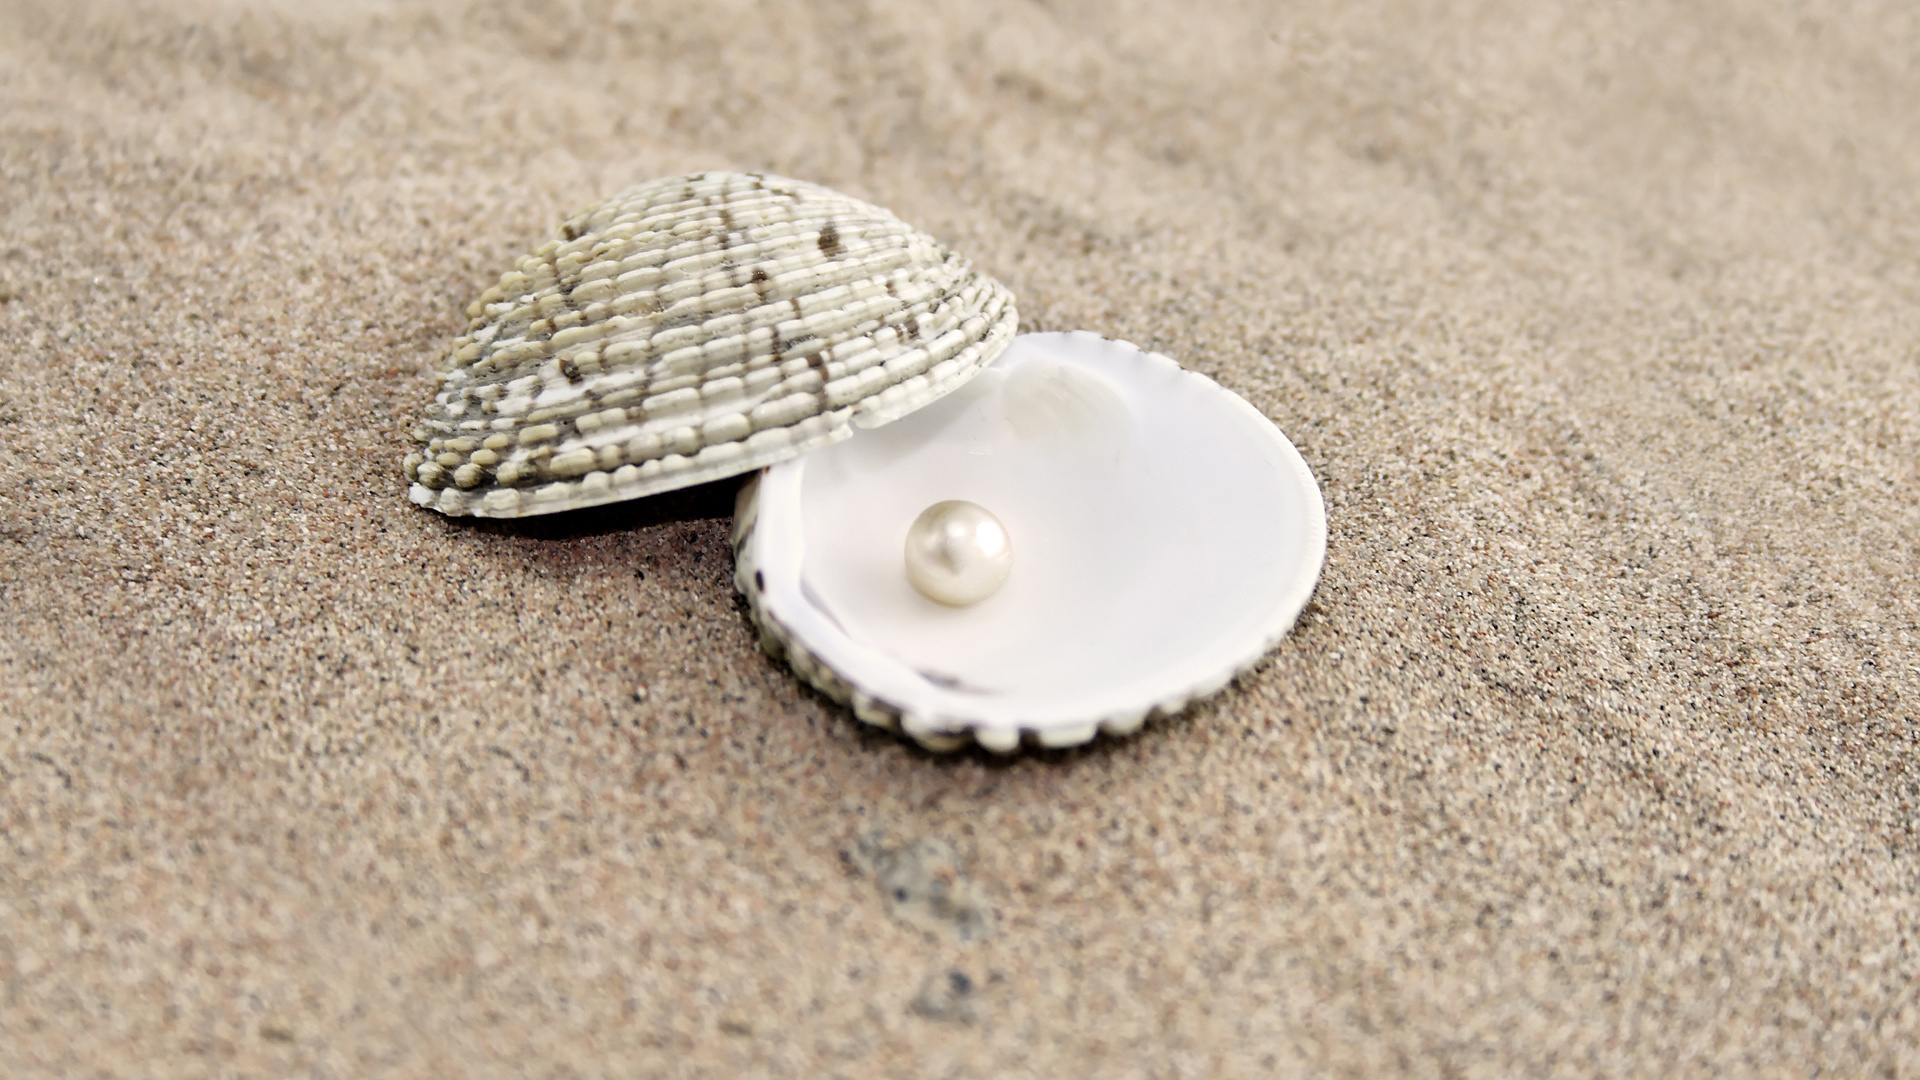 Earth Shell HD Wallpaper | Background Image